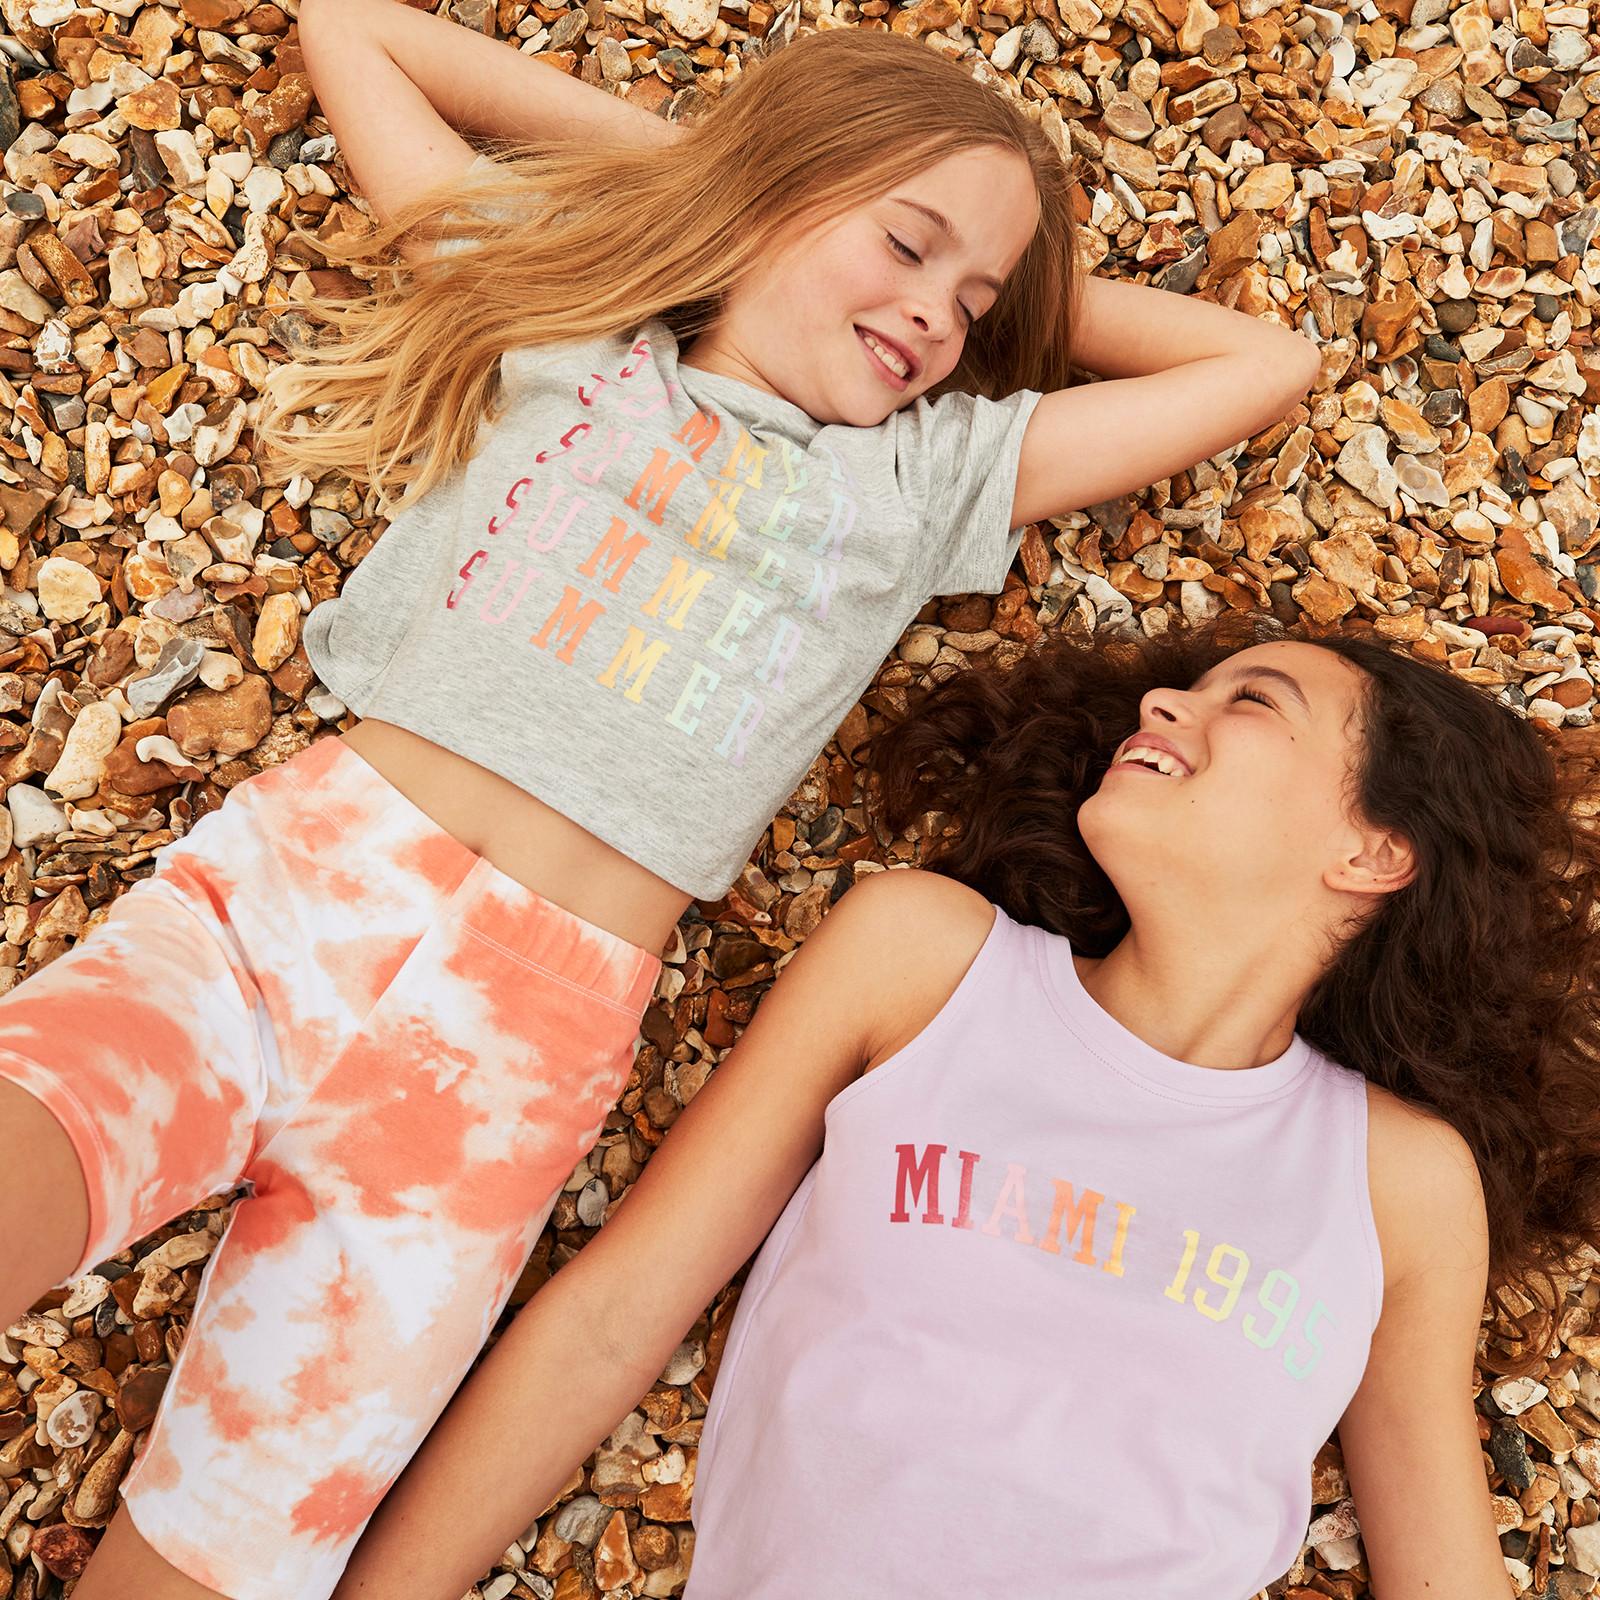 Kids wear pastel graphic and tie-dye outfits